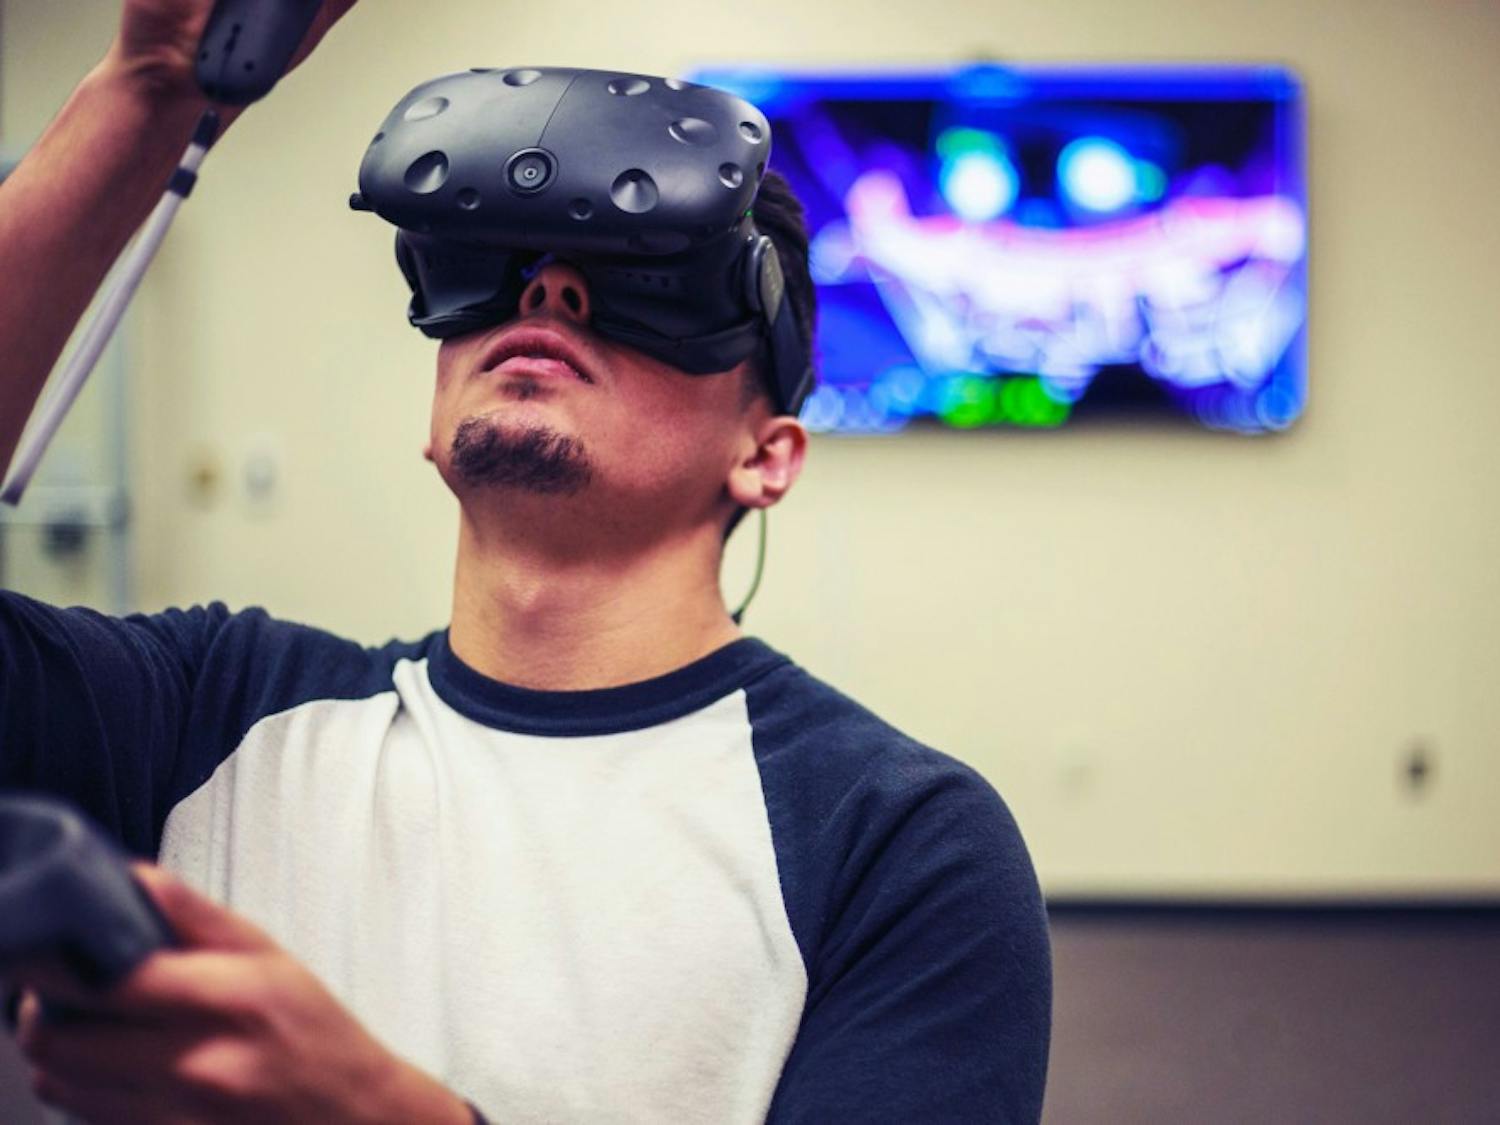 Derek Luna, library technical assistant and junior civil engineering major at UNM, plays a game on the new VR system inside Centennial Library. Luna says that, aside for gaming purposes, he plans to use VR to view his architectural designs.